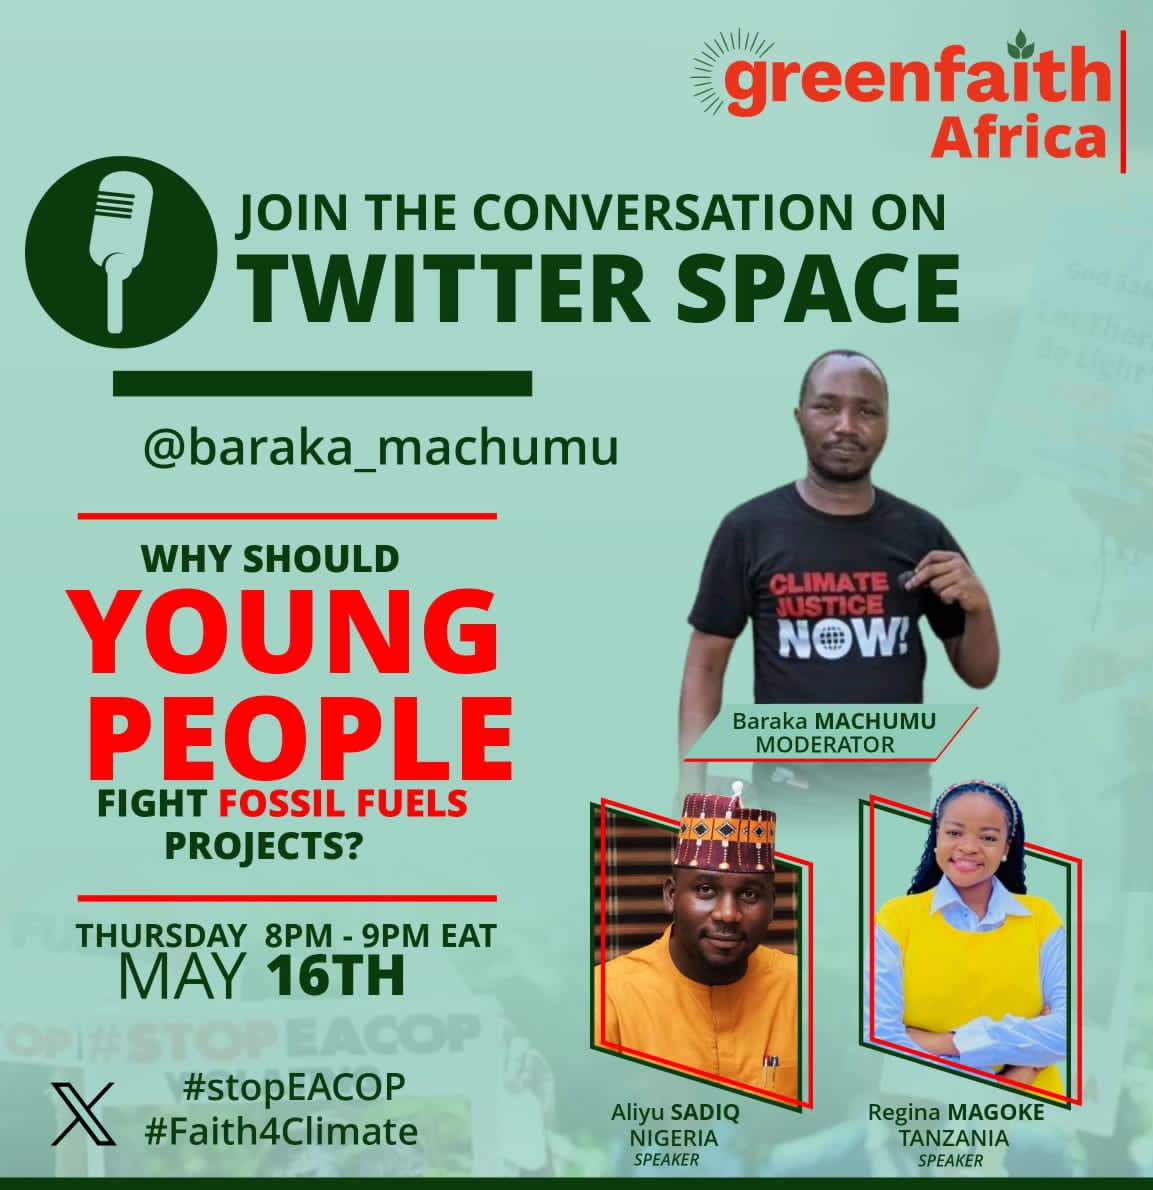 A conversation to join!!! If you are passionate about a healthy planet, don't miss out on this conversation!!! Let's discussion the future of Africa without #Fossilfuels #Faiths4Climate Follow @GreenFaith_Afr